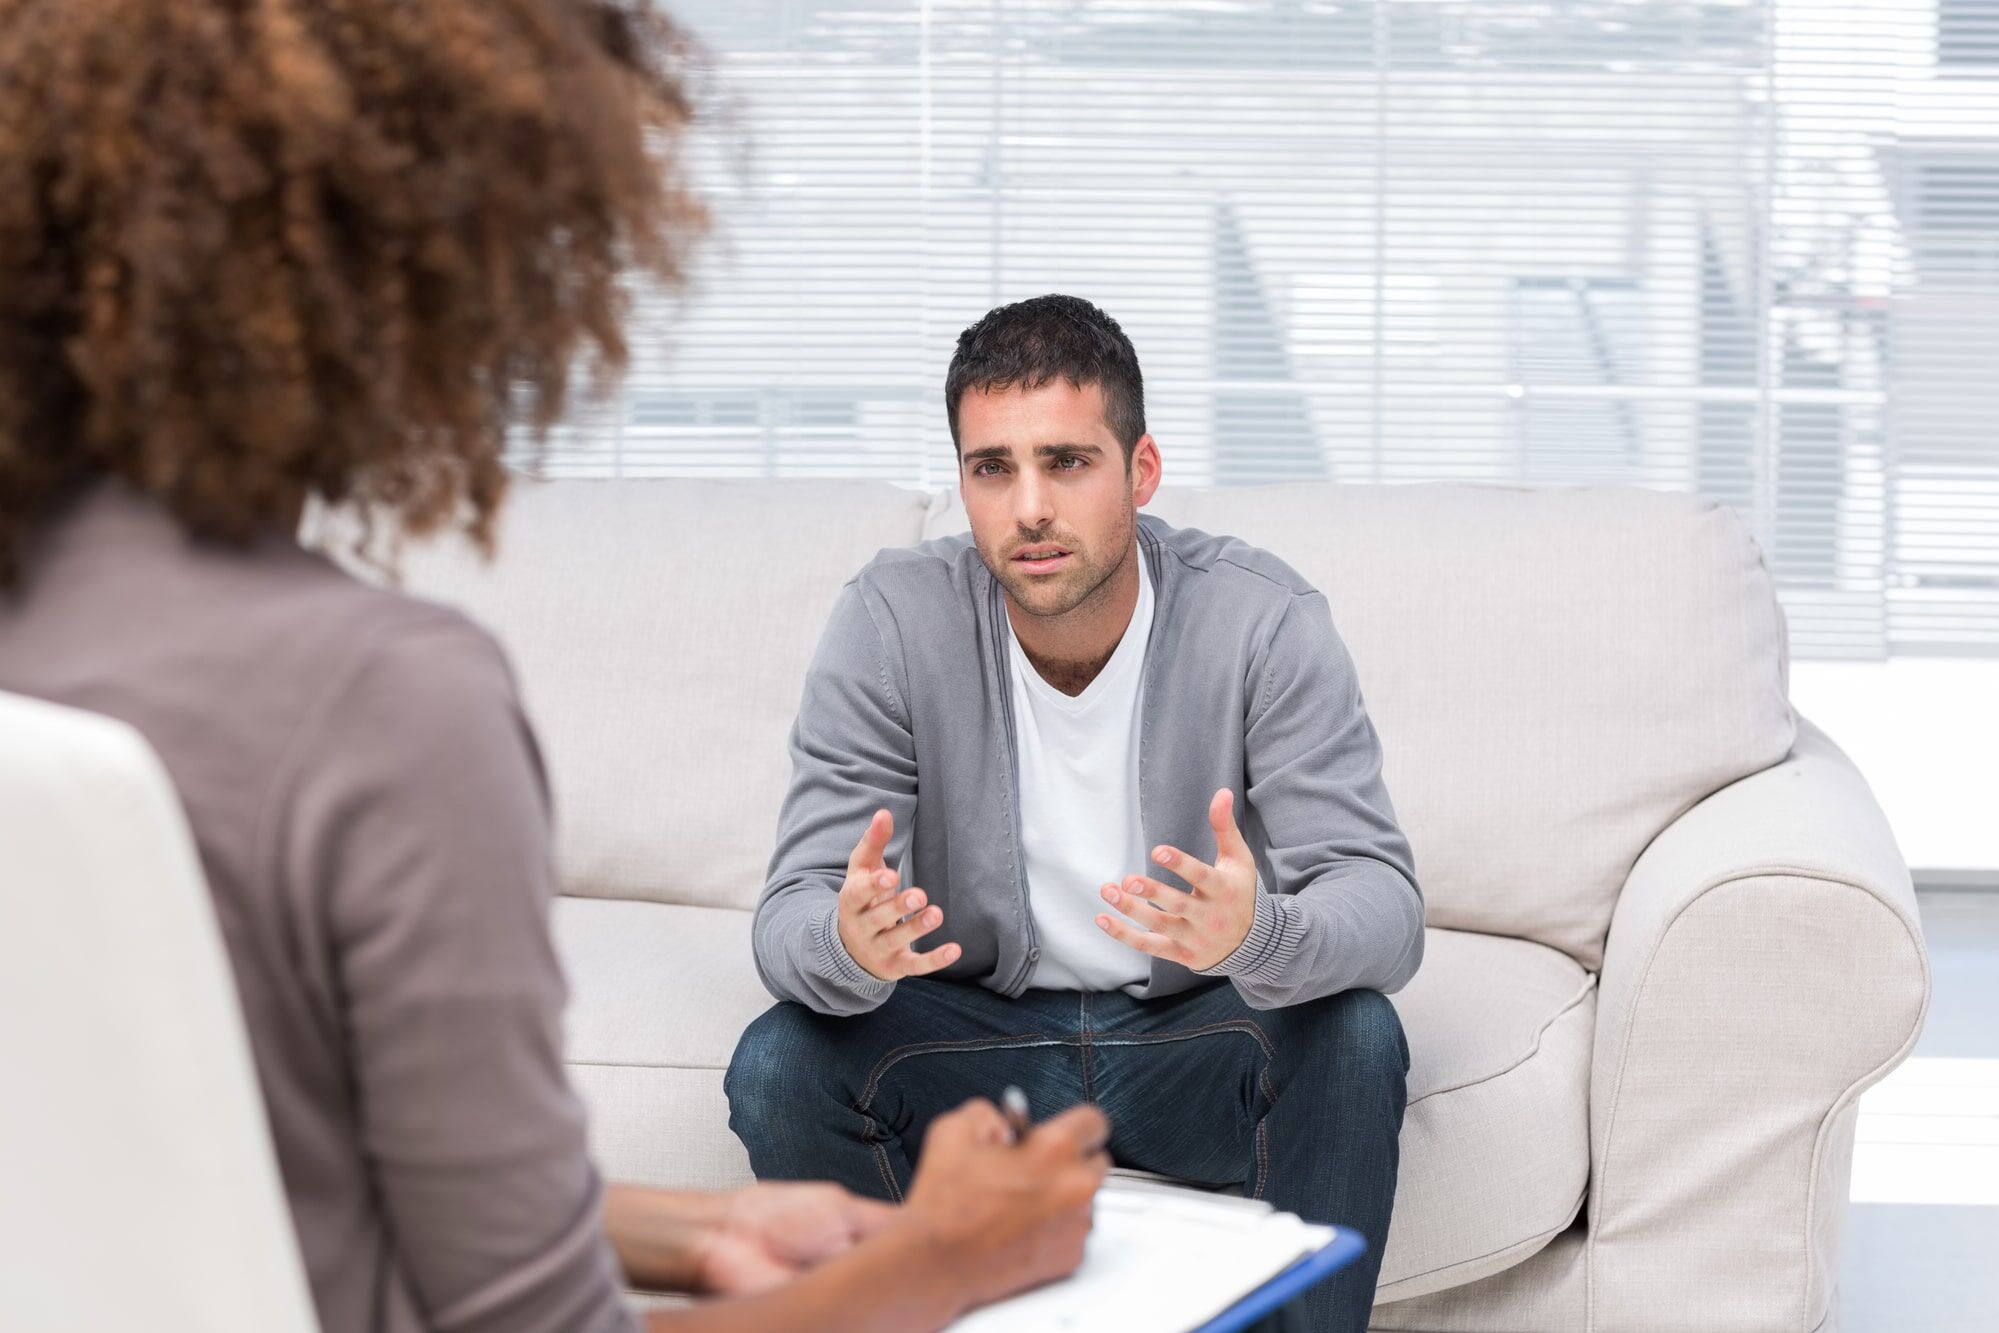 a person with bipolar disorder and substance abuse learning about treatment programs to address their mental health concerns at Transformations Mending Fences